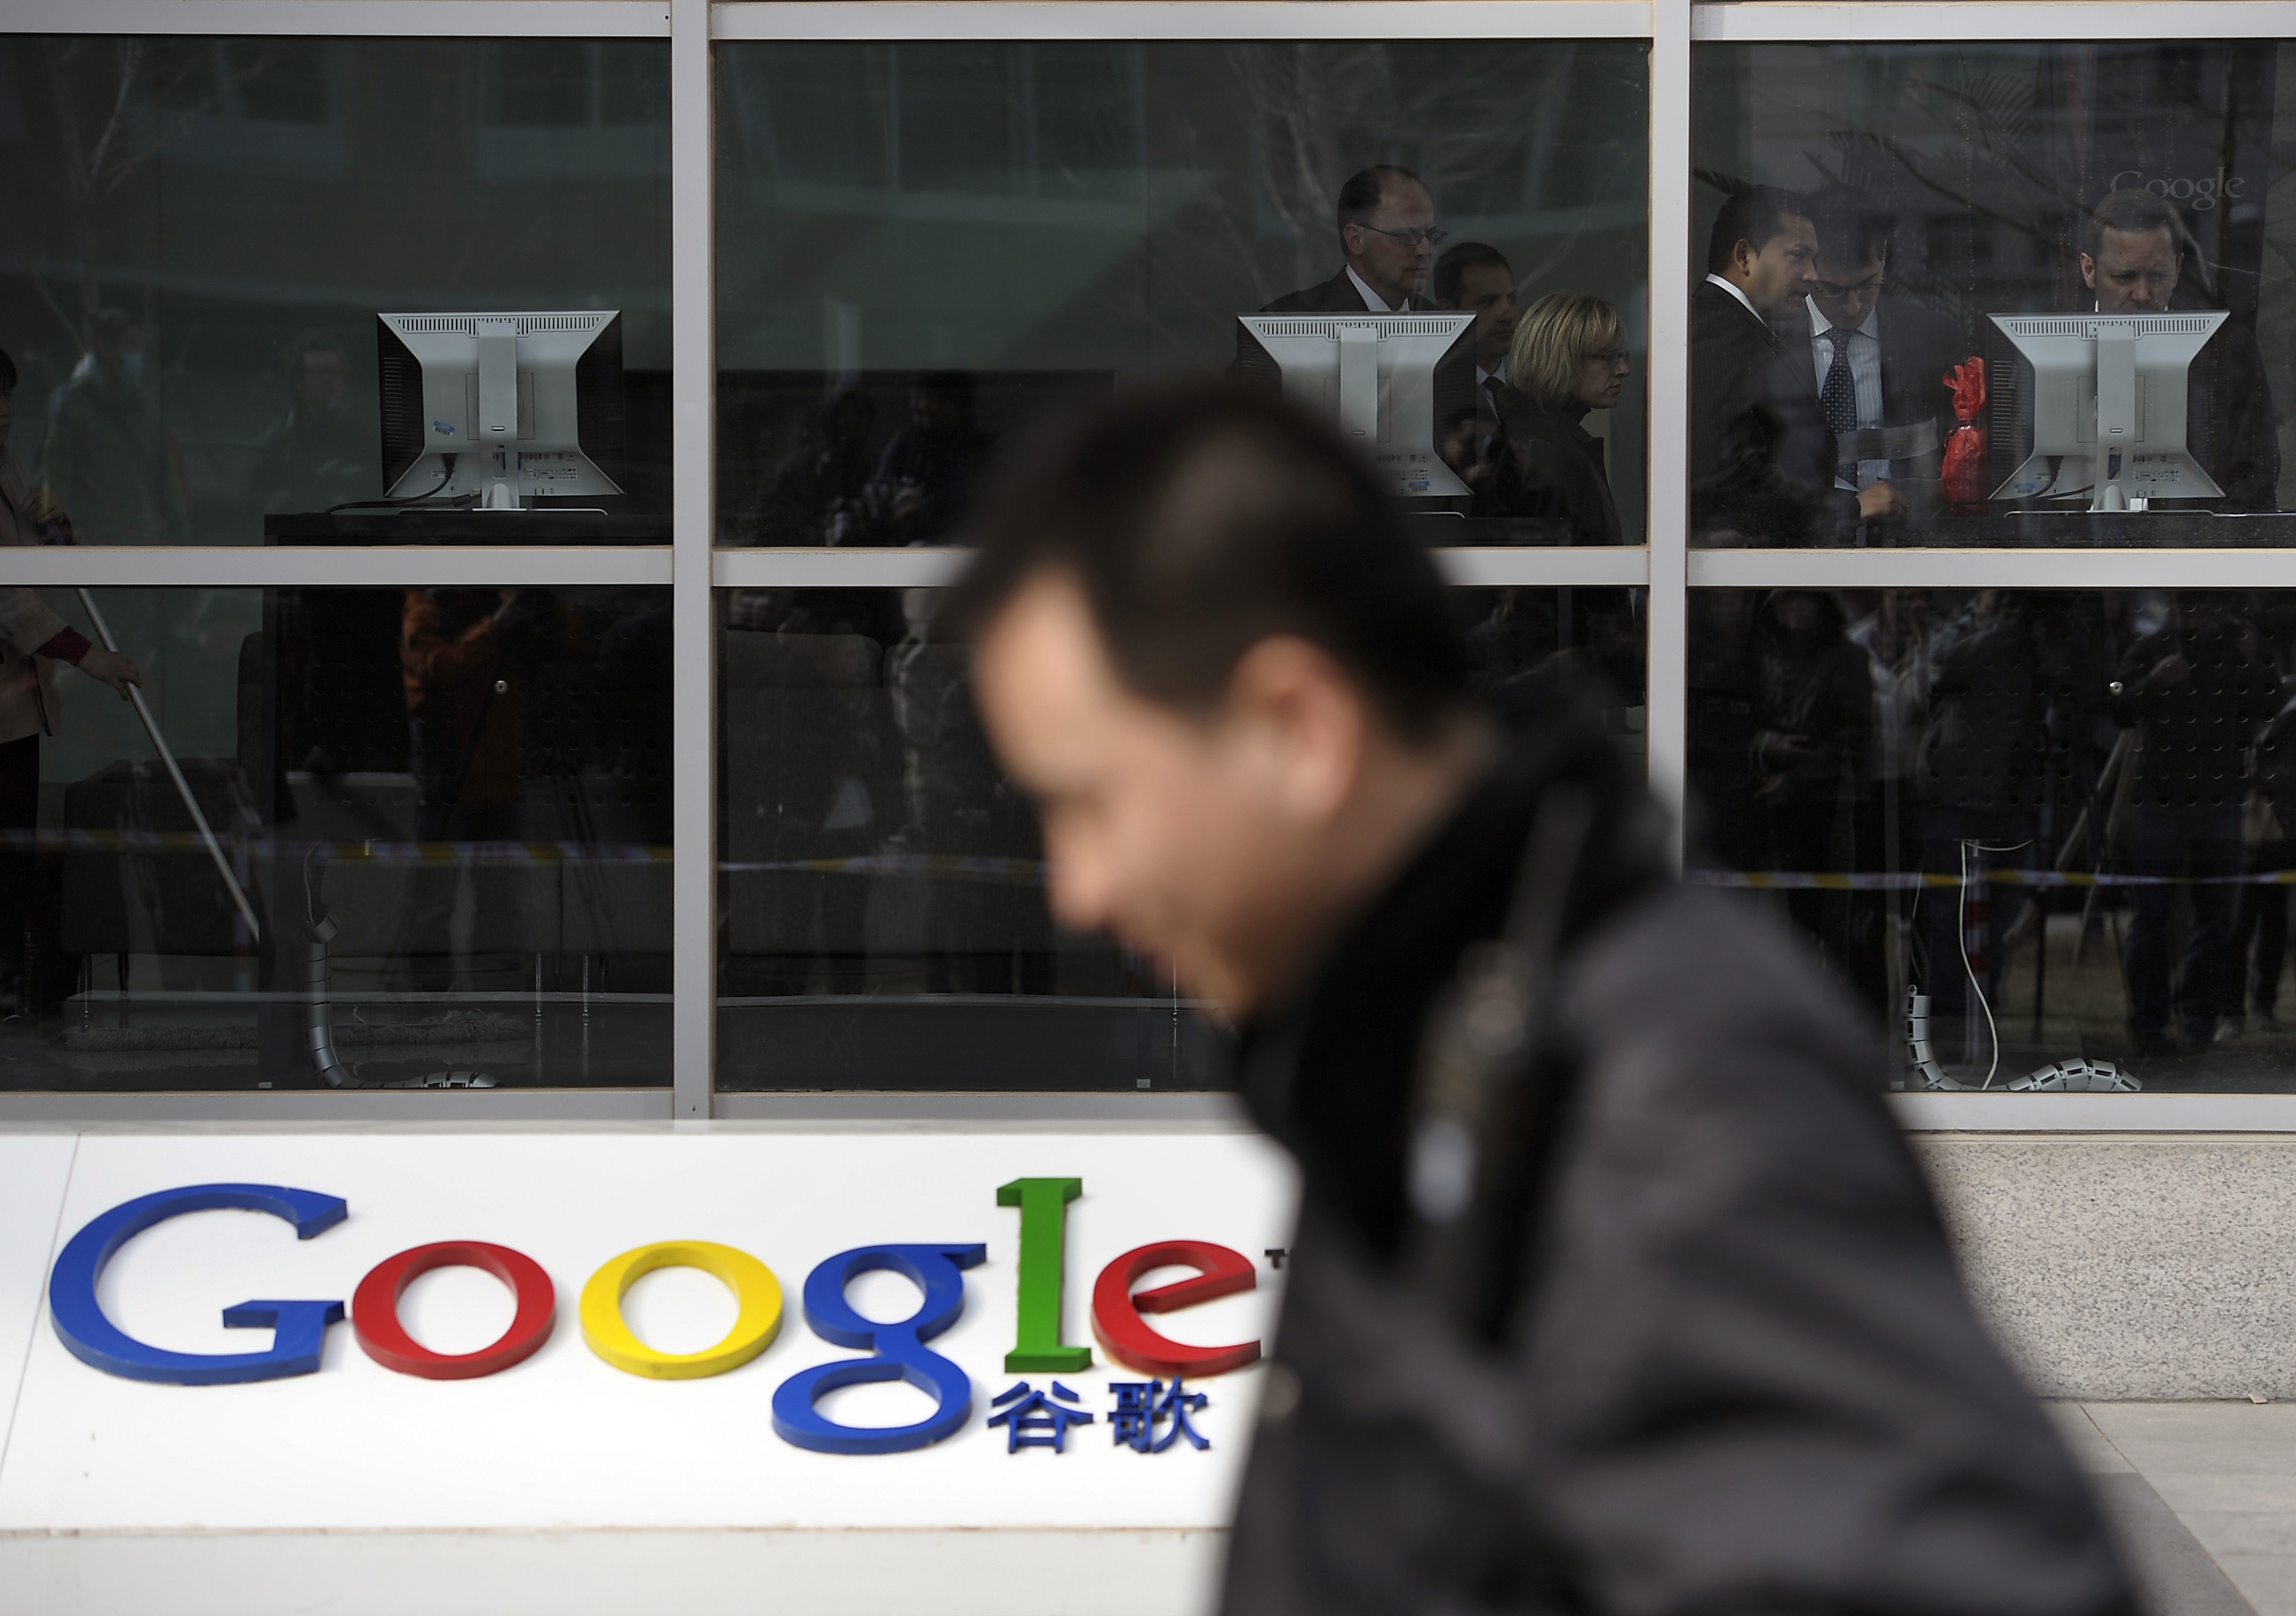 Google announced its retreat from China in 2010 over censorship issues. Photo: AP 